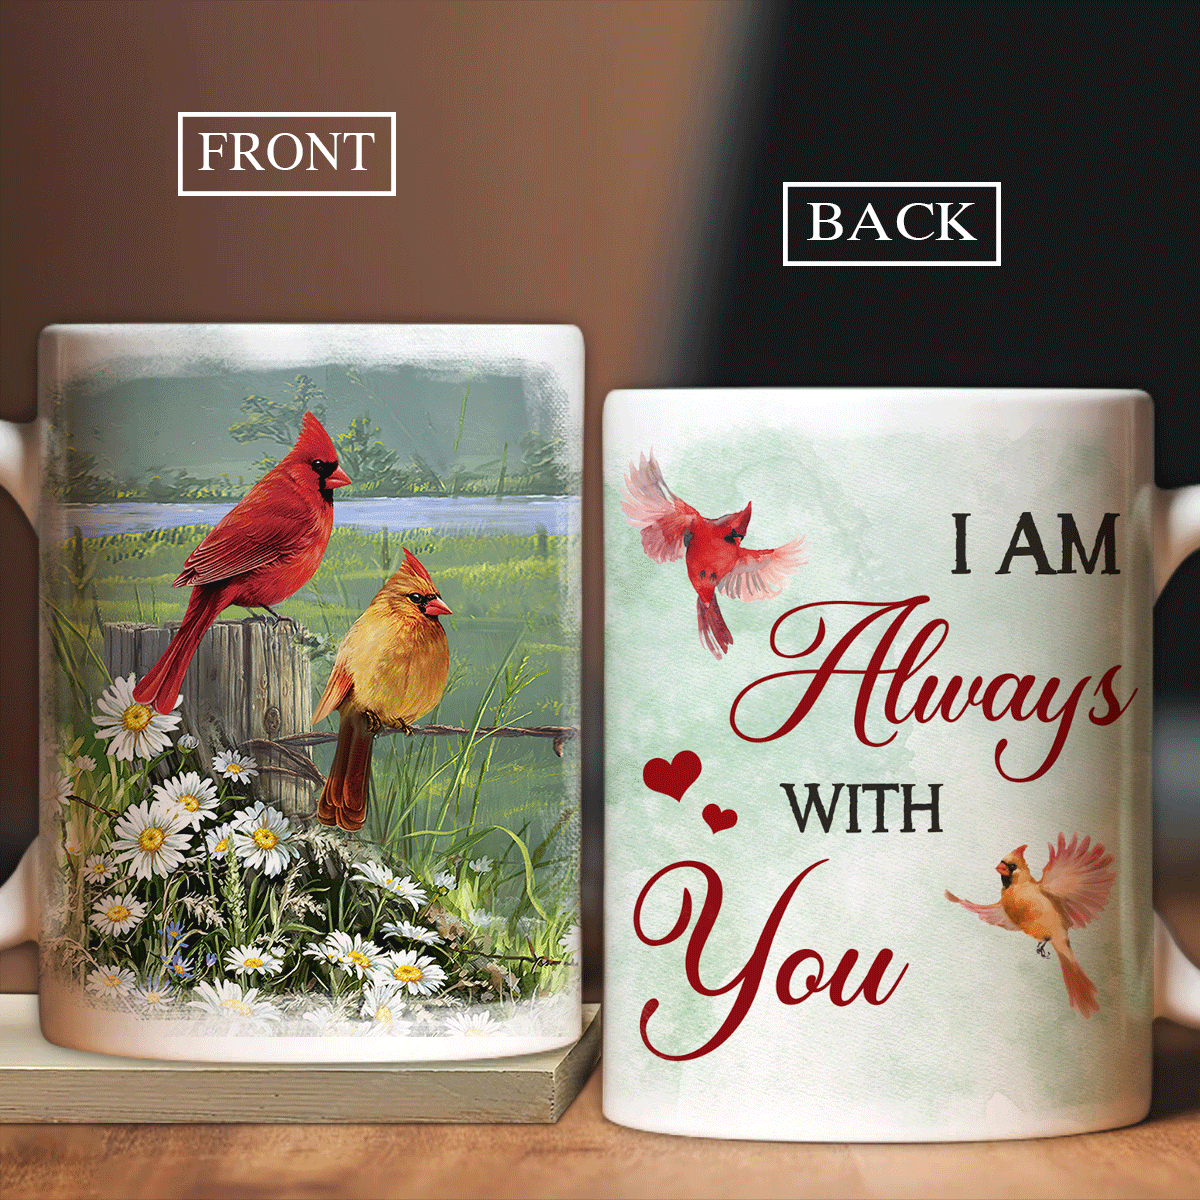 Memorial White Mug - Green meadow land, Daisy field, Cardinal drawing - Gift for members family - I am always with you - Heaven White Mug.